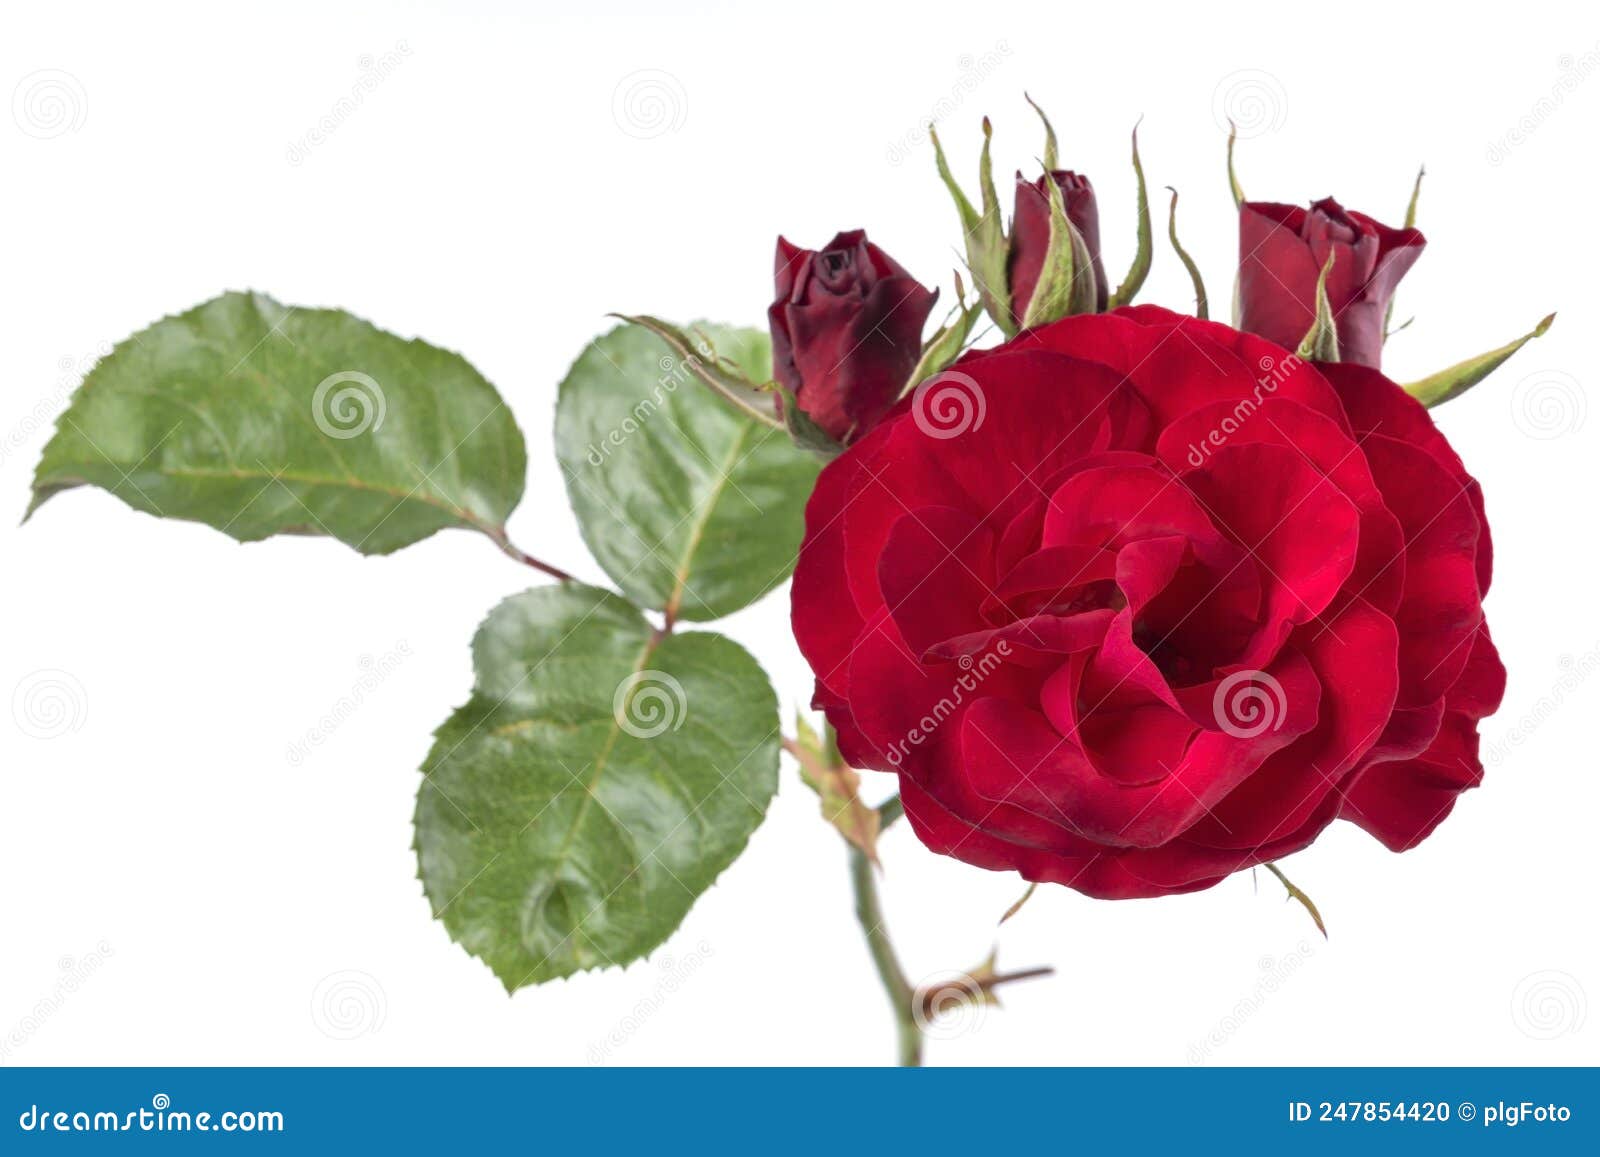 One Red Rose with Buds and Leaves Isolated on White Stock Photo - Image ...